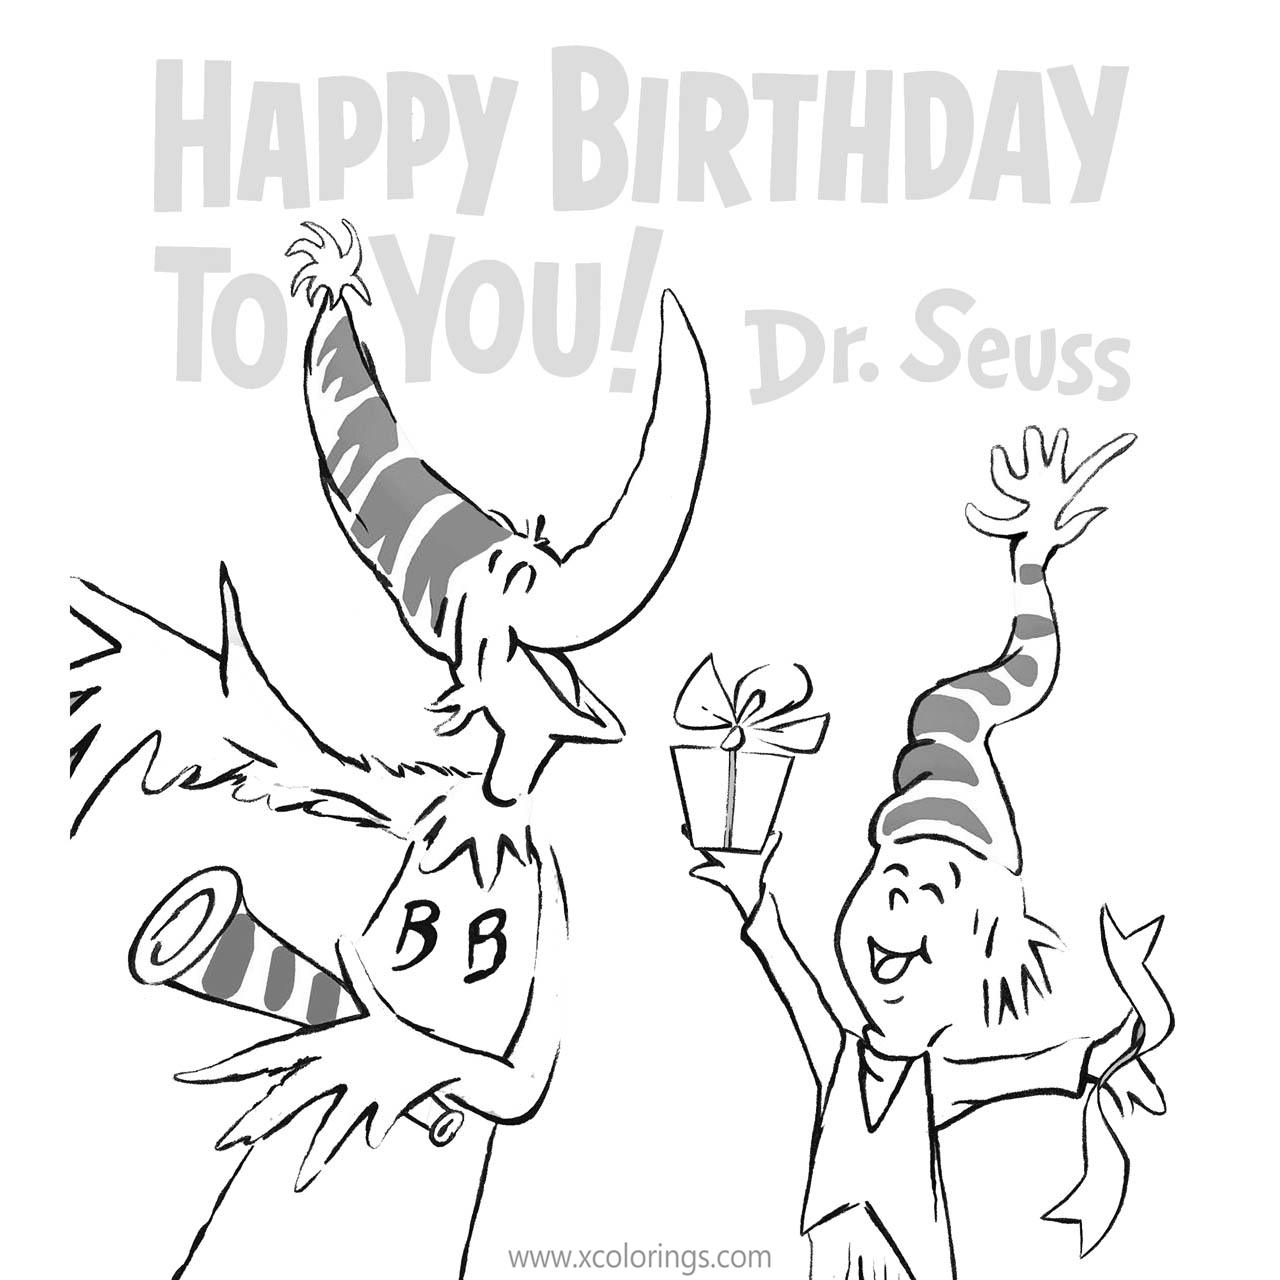 Happy Birthday To You Dr Seuss Coloring Pages Free Printable Coloring Pages